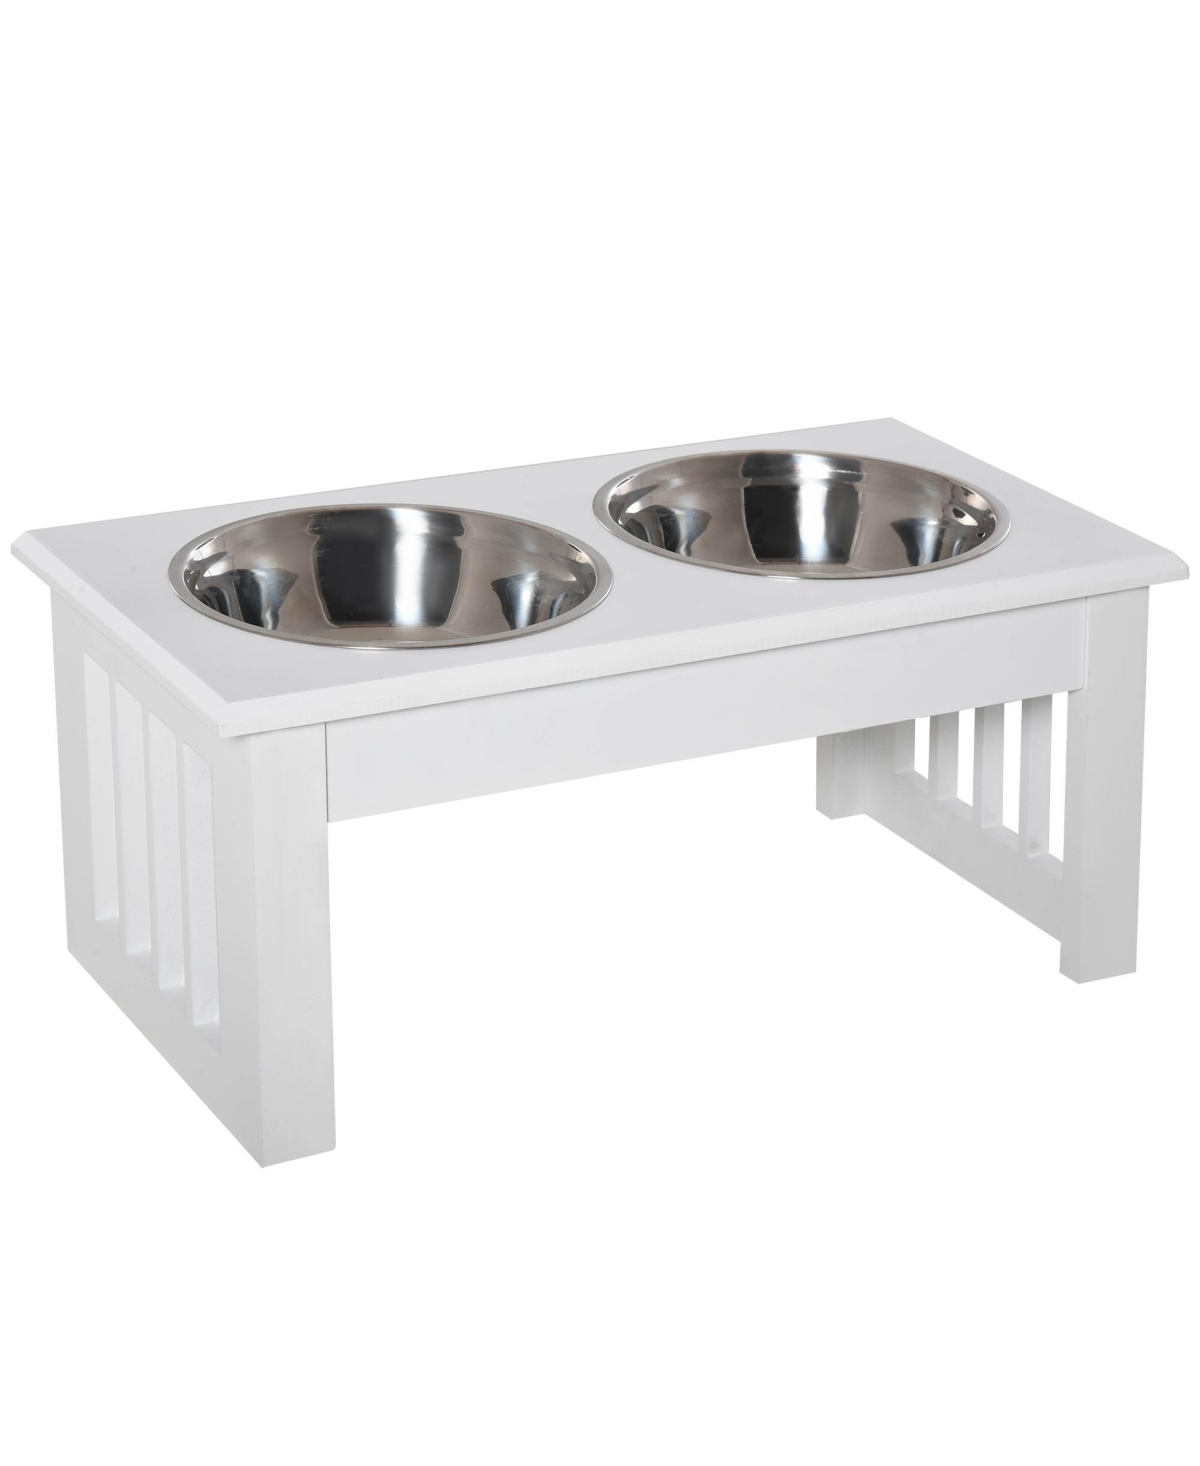 Modern Elevated Pet Food Bowl Feeder Dishes, Set of 2 White - White